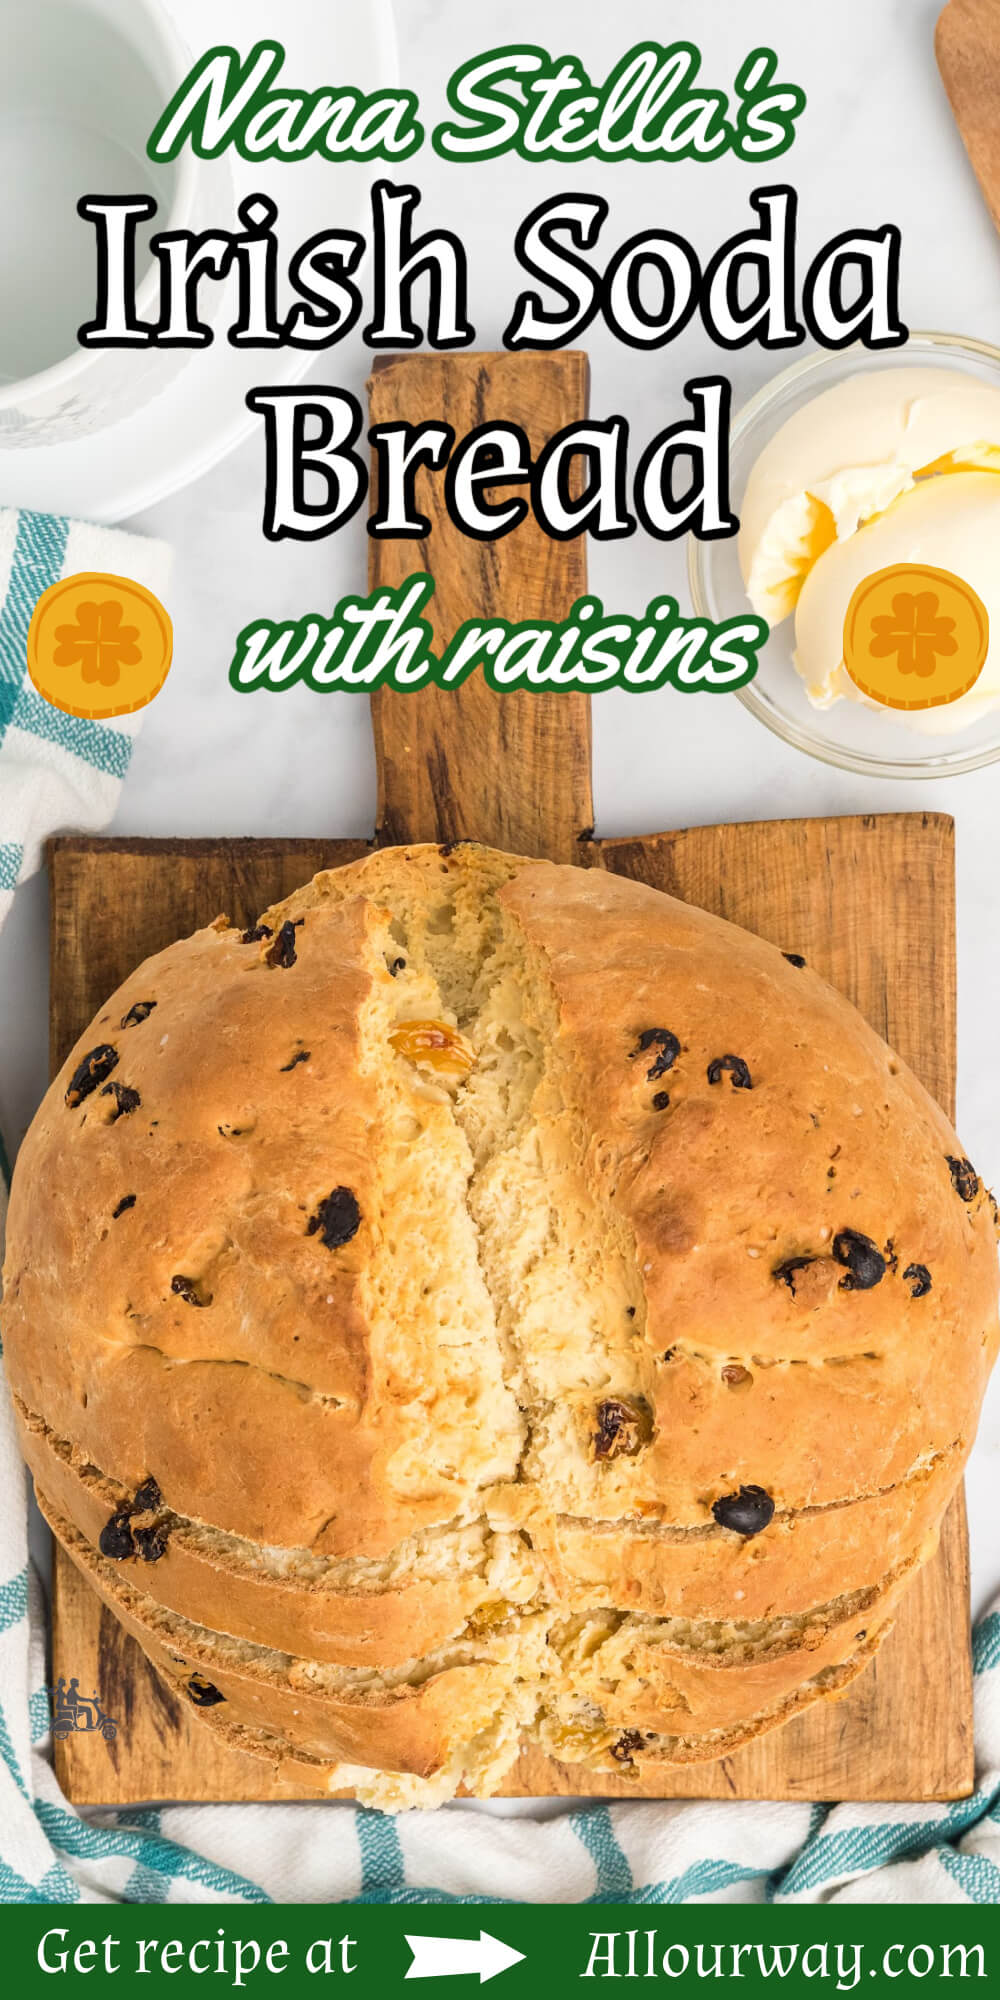 This Irish Soda Bread with Raisins is a quick bread that doesn't need any yeast. Our Nana's traditional bread's leavening comes from the combination of baking soda and buttermilk. The texture is dense, yet soft and not dry, with a fantastic crusty exterior. The optimum way to eat this bread is sliced open and slathered with creamy Irish butter. The Irish make countless loaves of soda bread for all their celebrations. This easy bread would be great for your St. Patrick's Day feast.